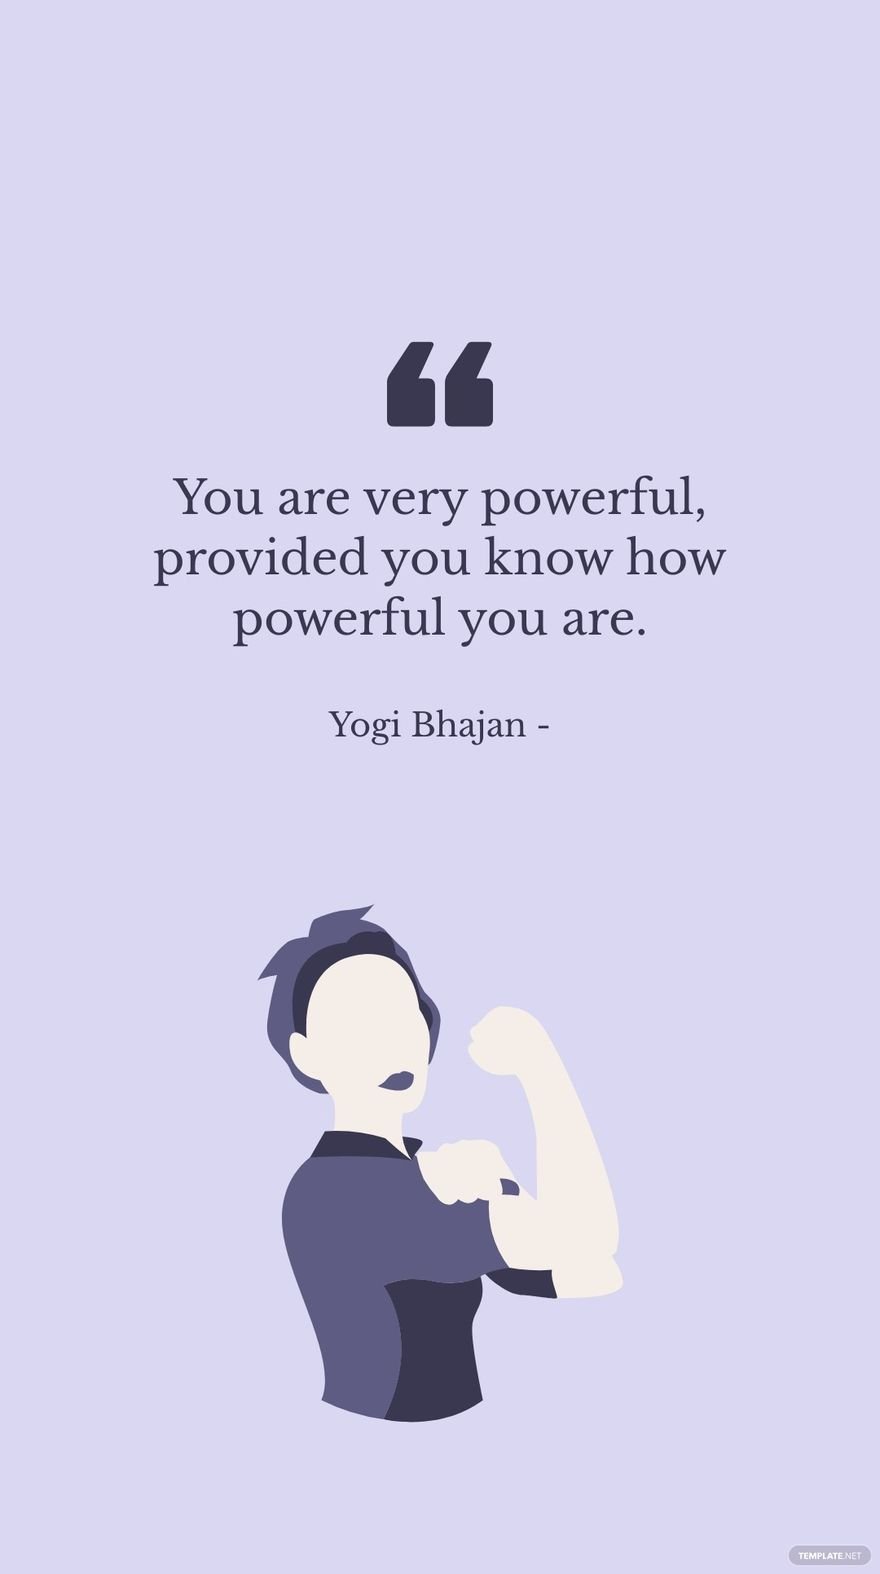 Free Yogi Bhajan - You are very powerful, provided you know how powerful you are. in JPG